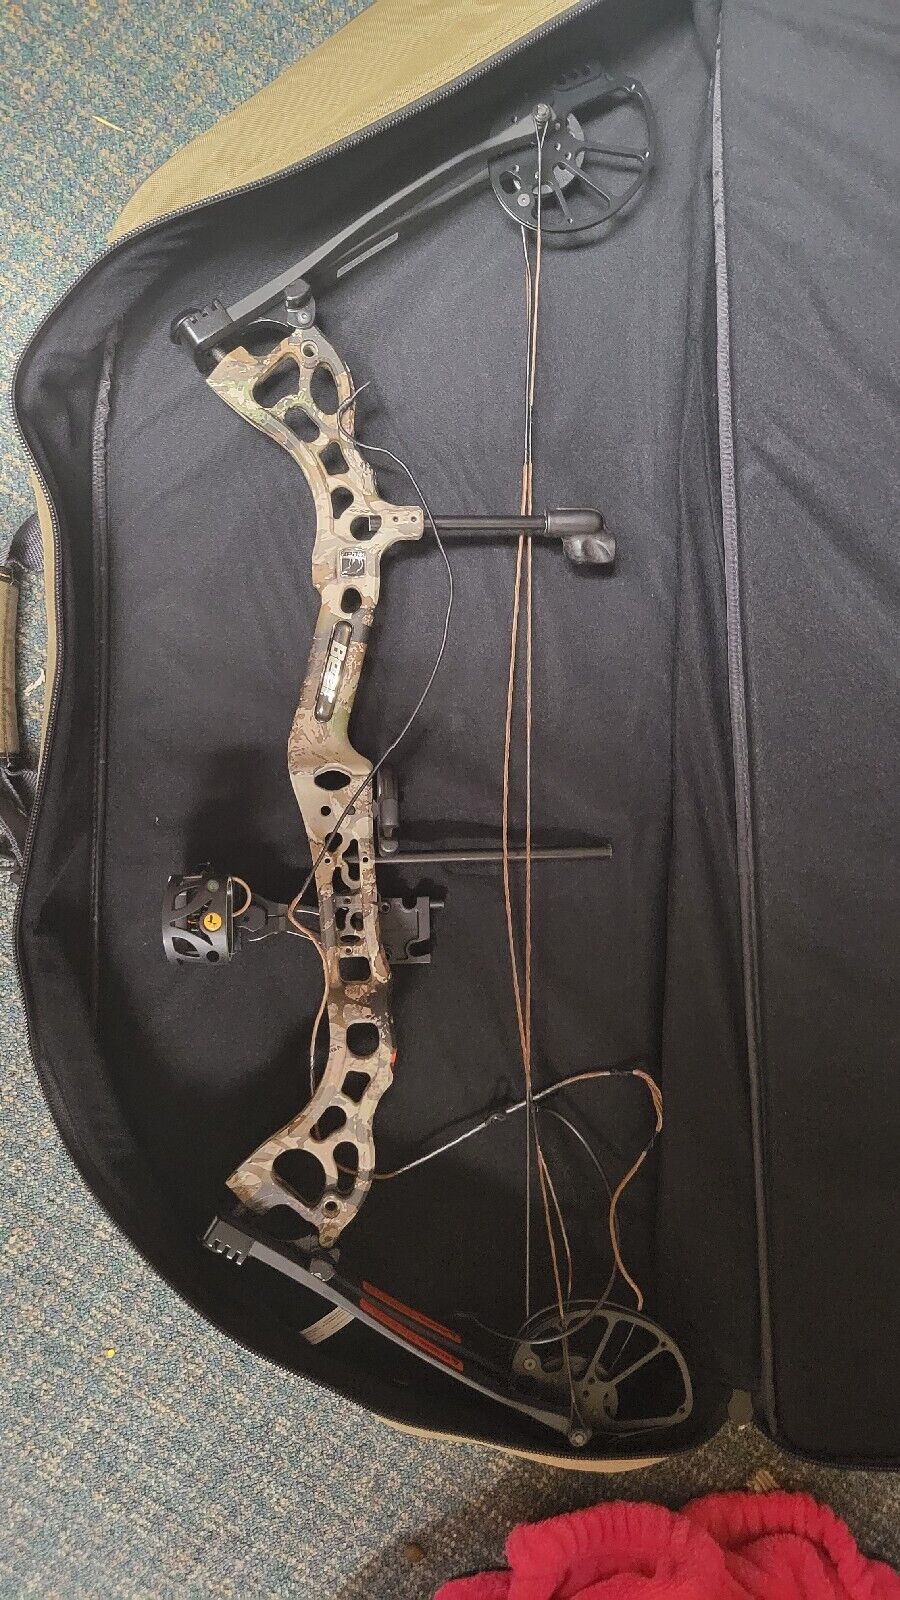 Bear Archery Volt LEFT HANDED Bow Never Used